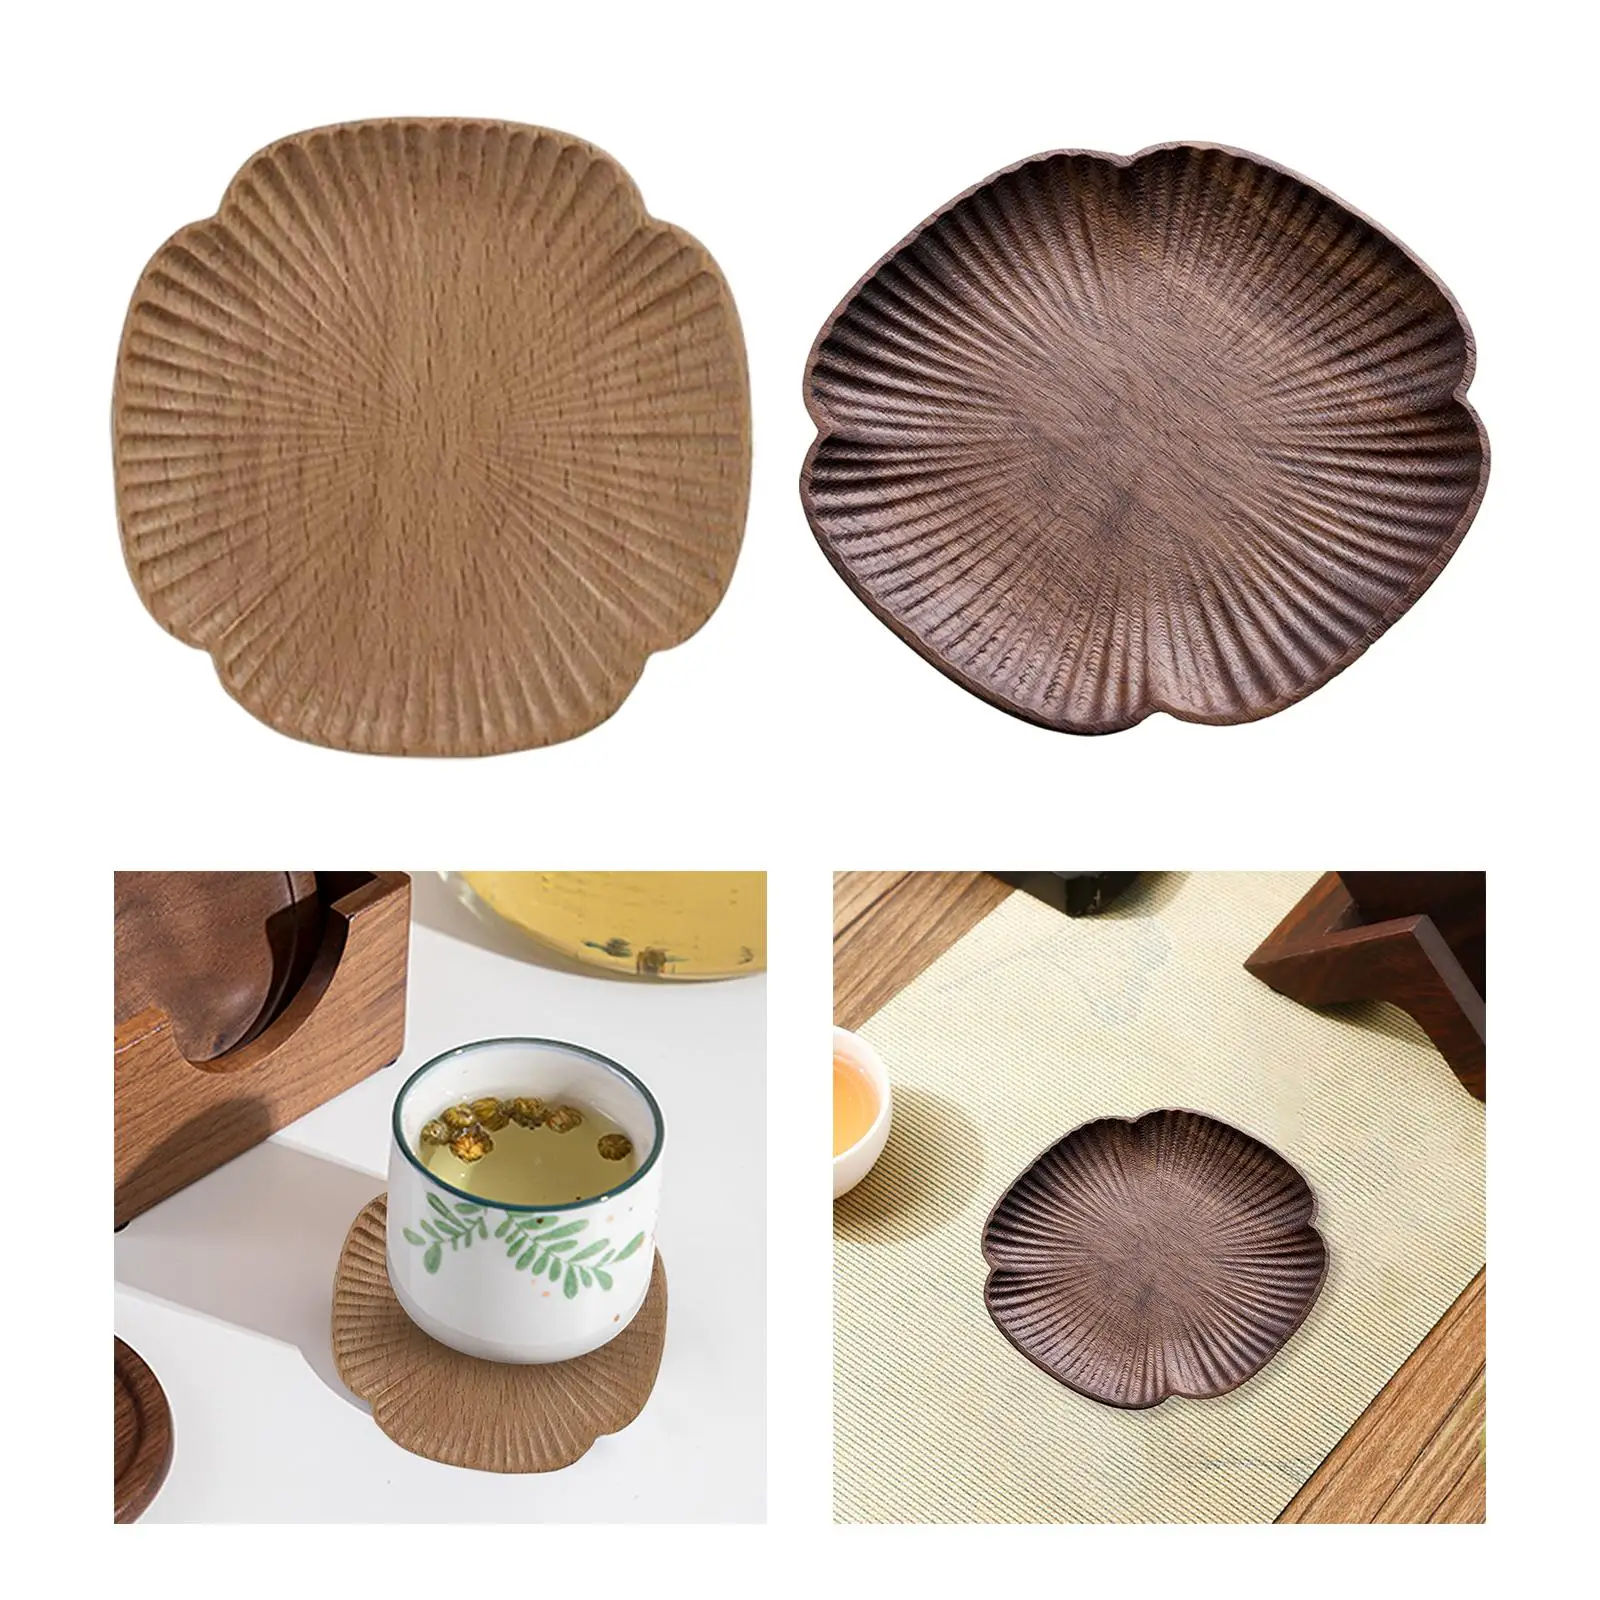 Coaster Cup Mat Flower Multifunctional Heat Resistant Kitchen Gadget Anti Scald Home Decor Storage Supplies for Living Room